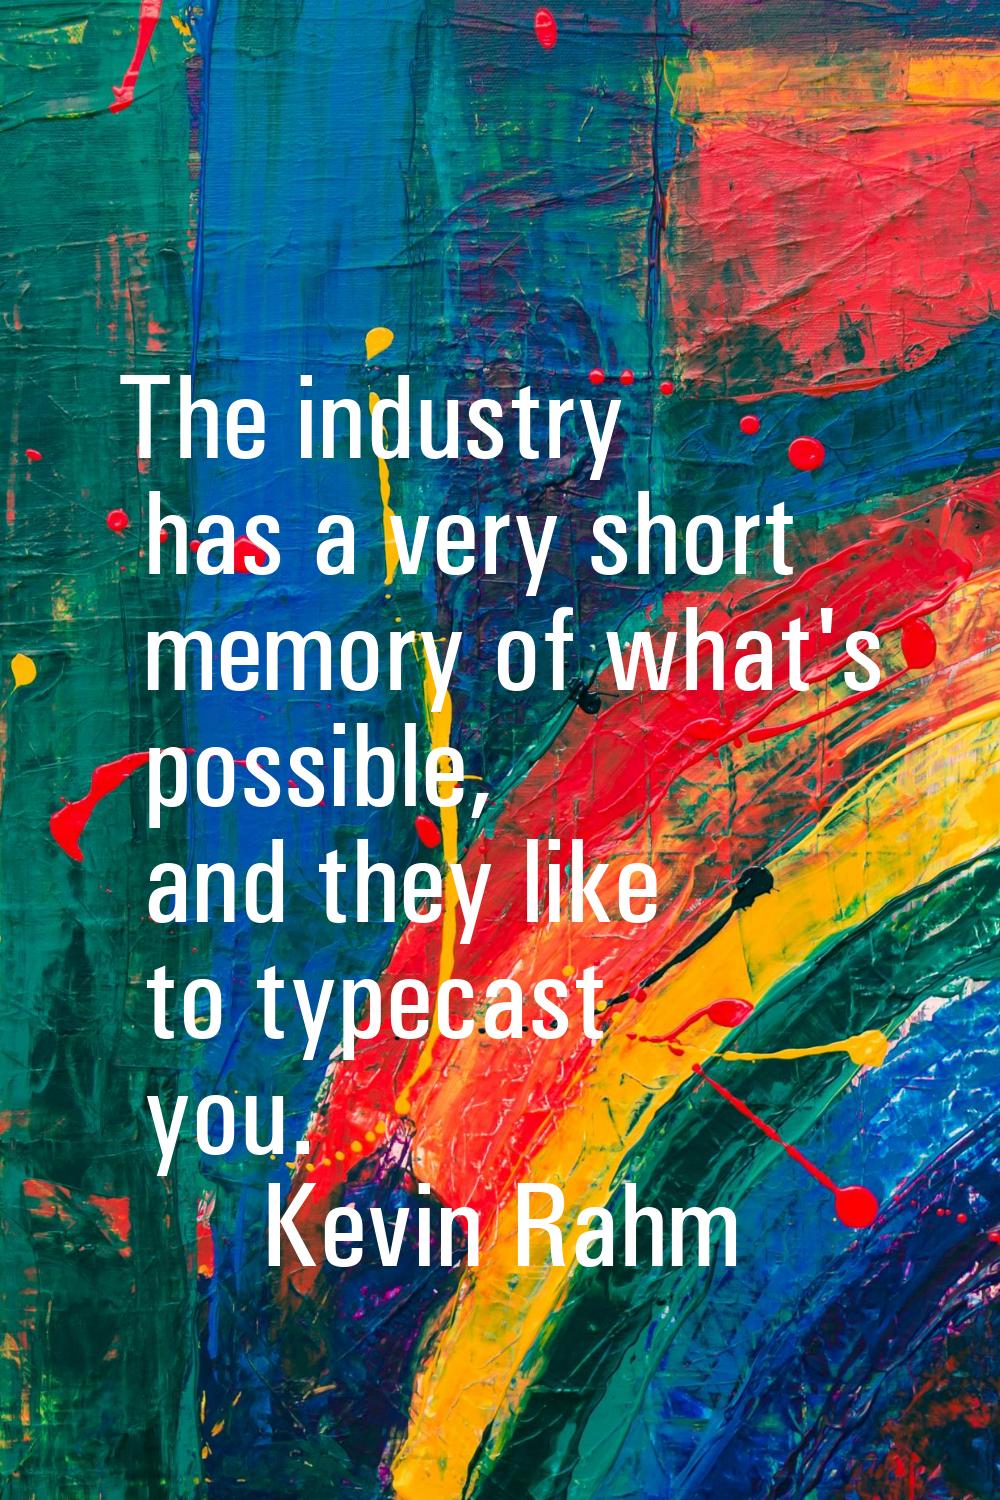 The industry has a very short memory of what's possible, and they like to typecast you.